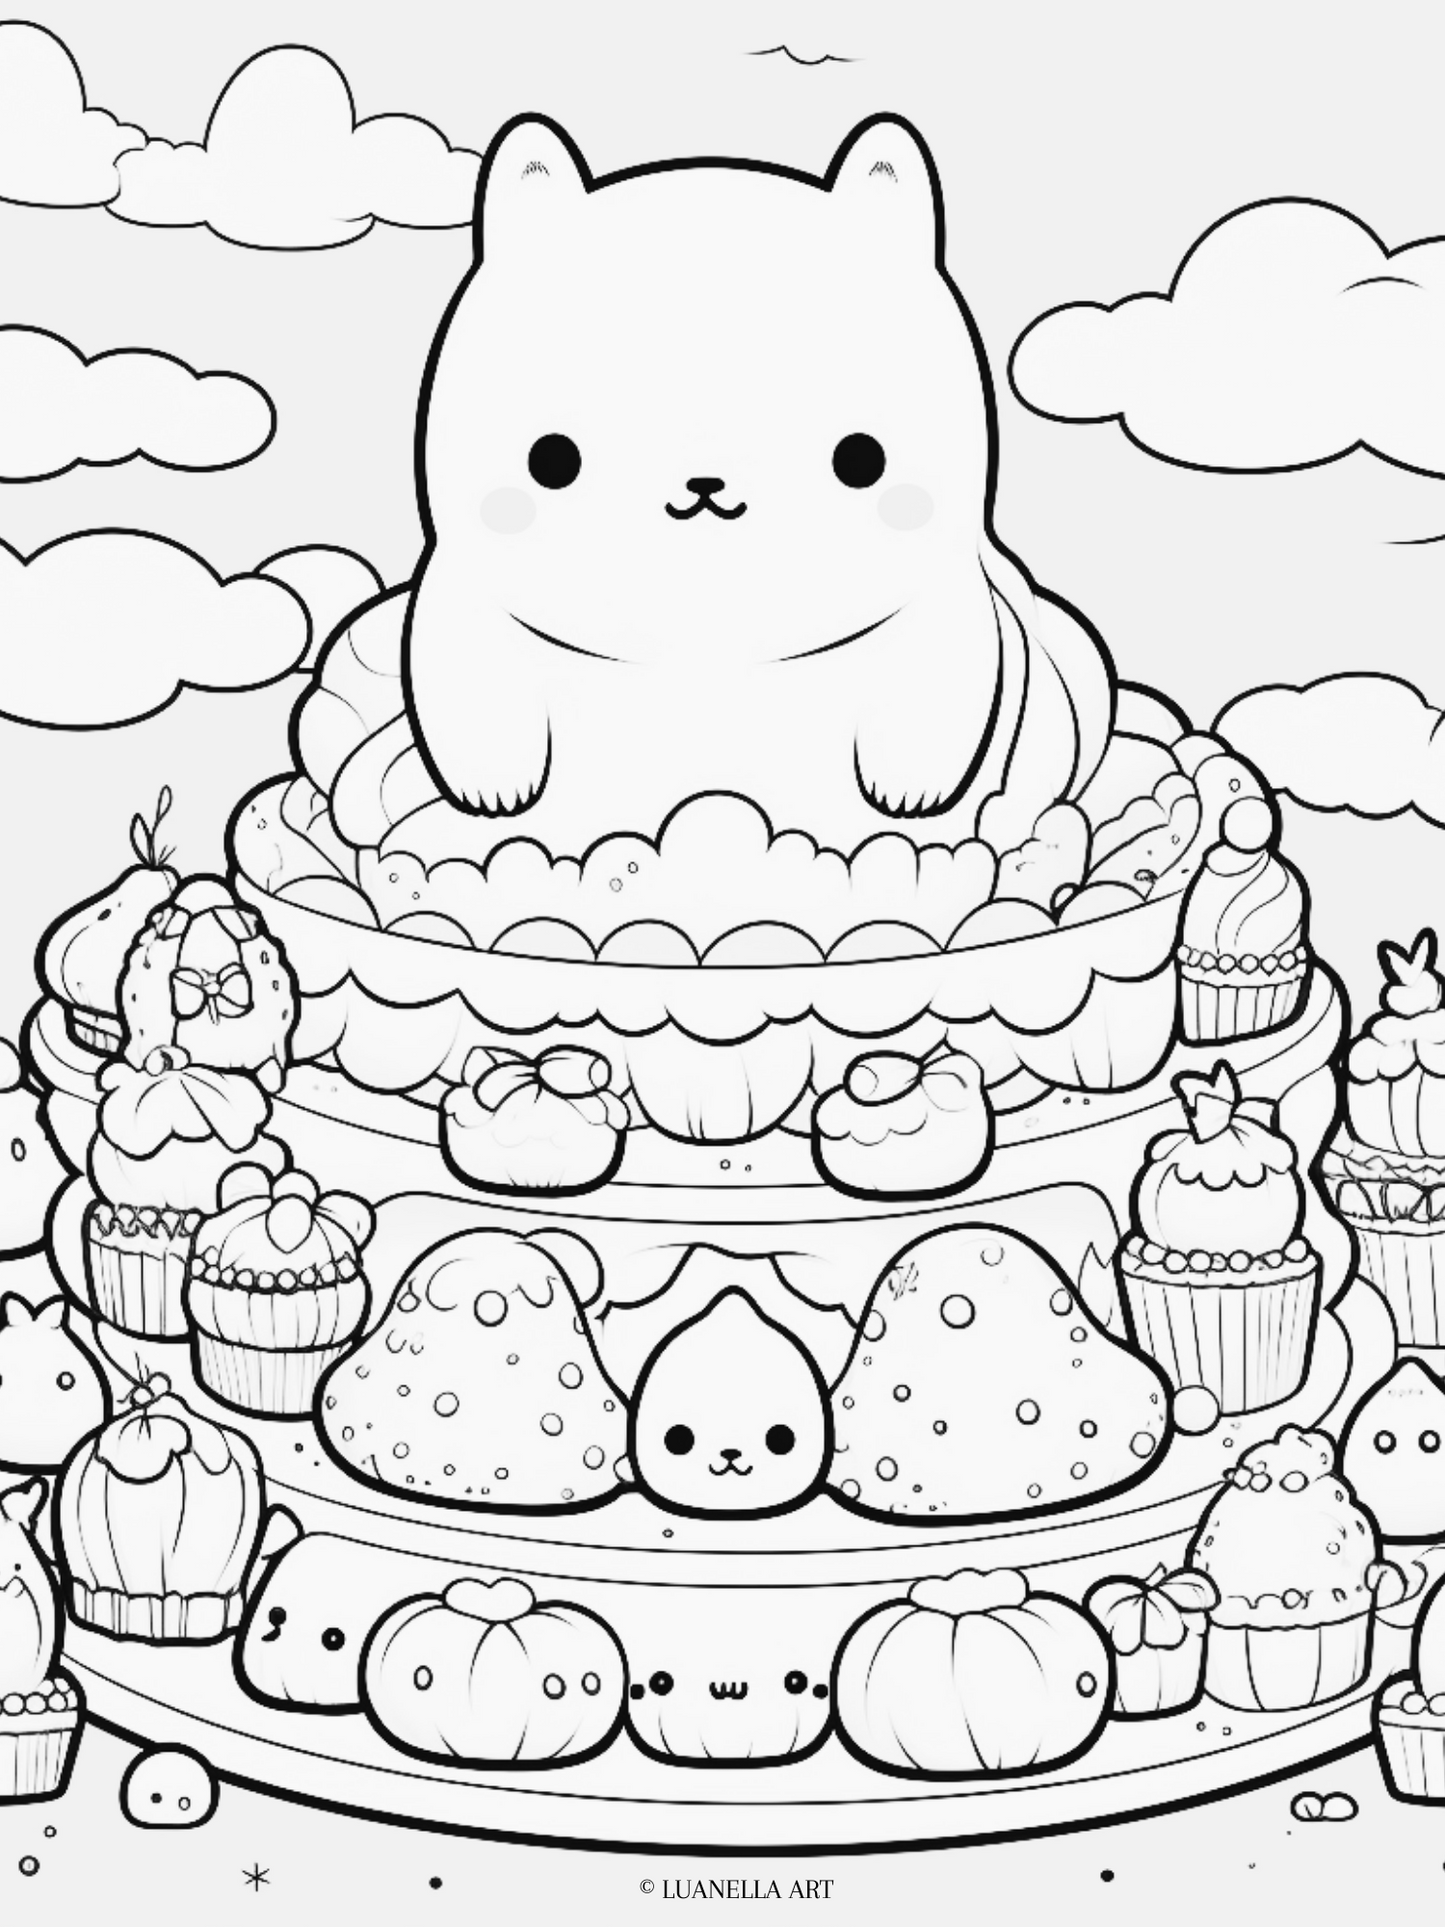 Squishmallow on cake with cloud background | Coloring Page | Instant Digital Download